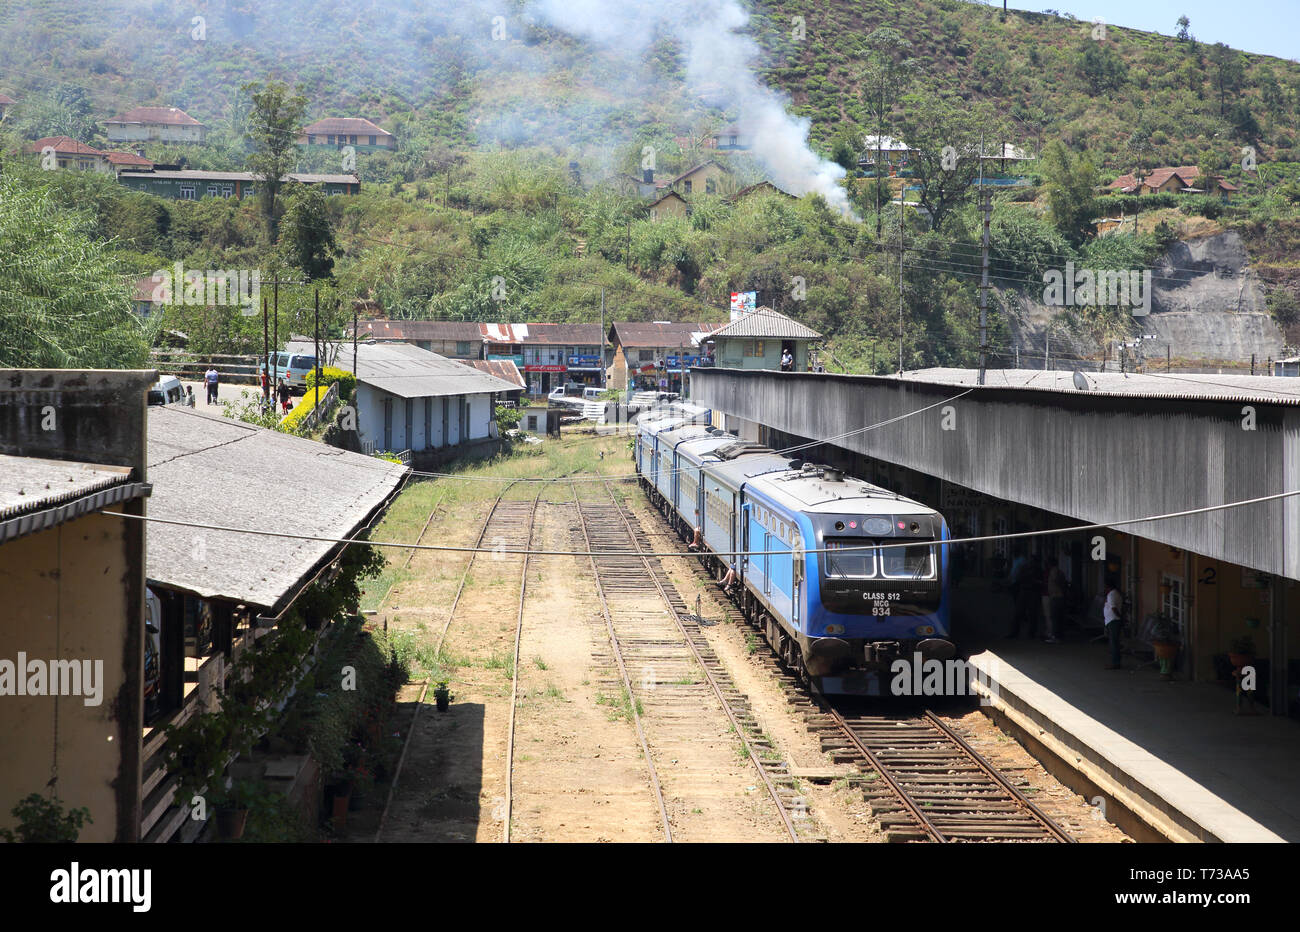 traveling by train through the hill country at nanu-oya station in sri lanka Stock Photo